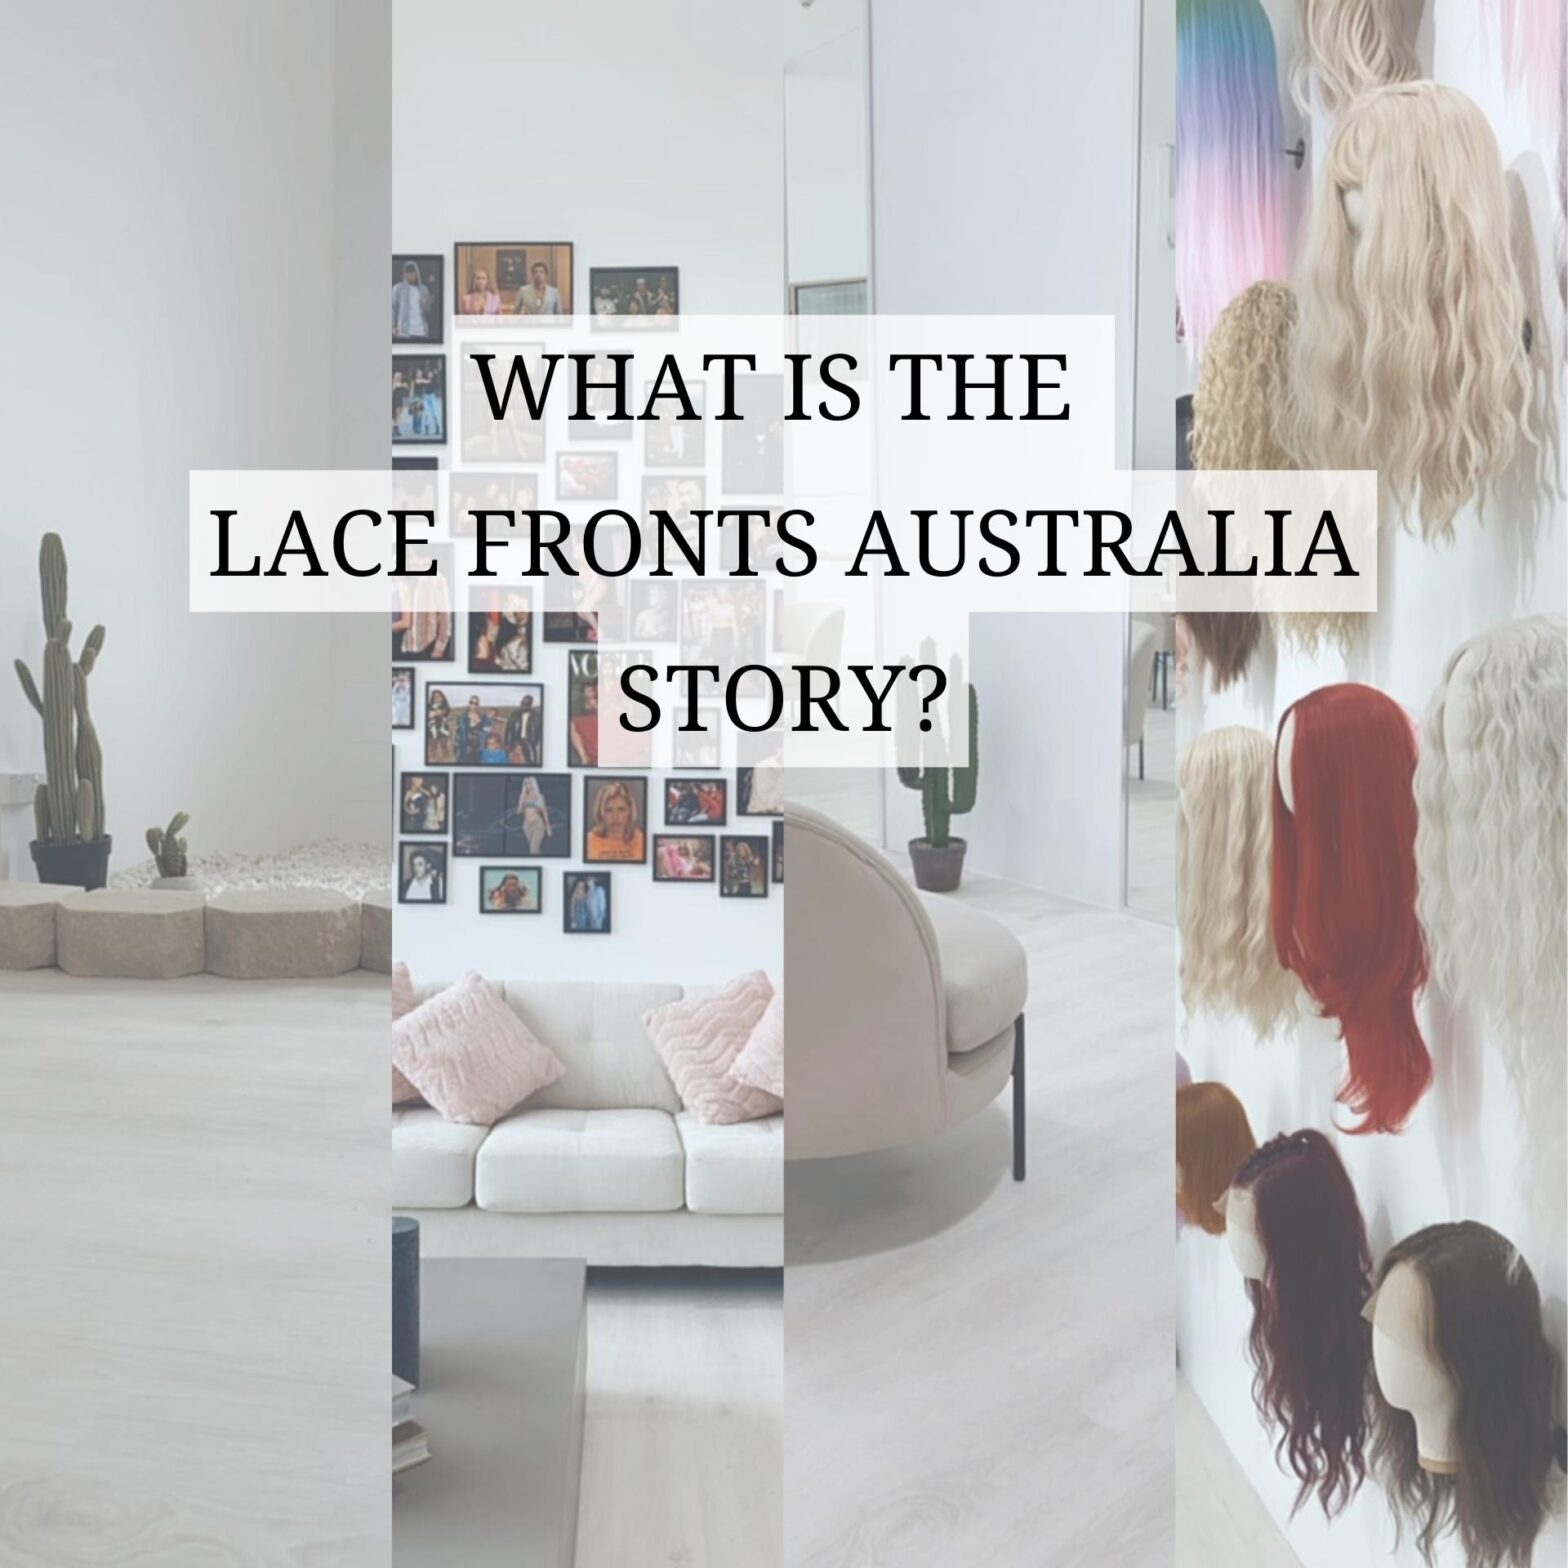 What is the Lace Fronts Australia story?